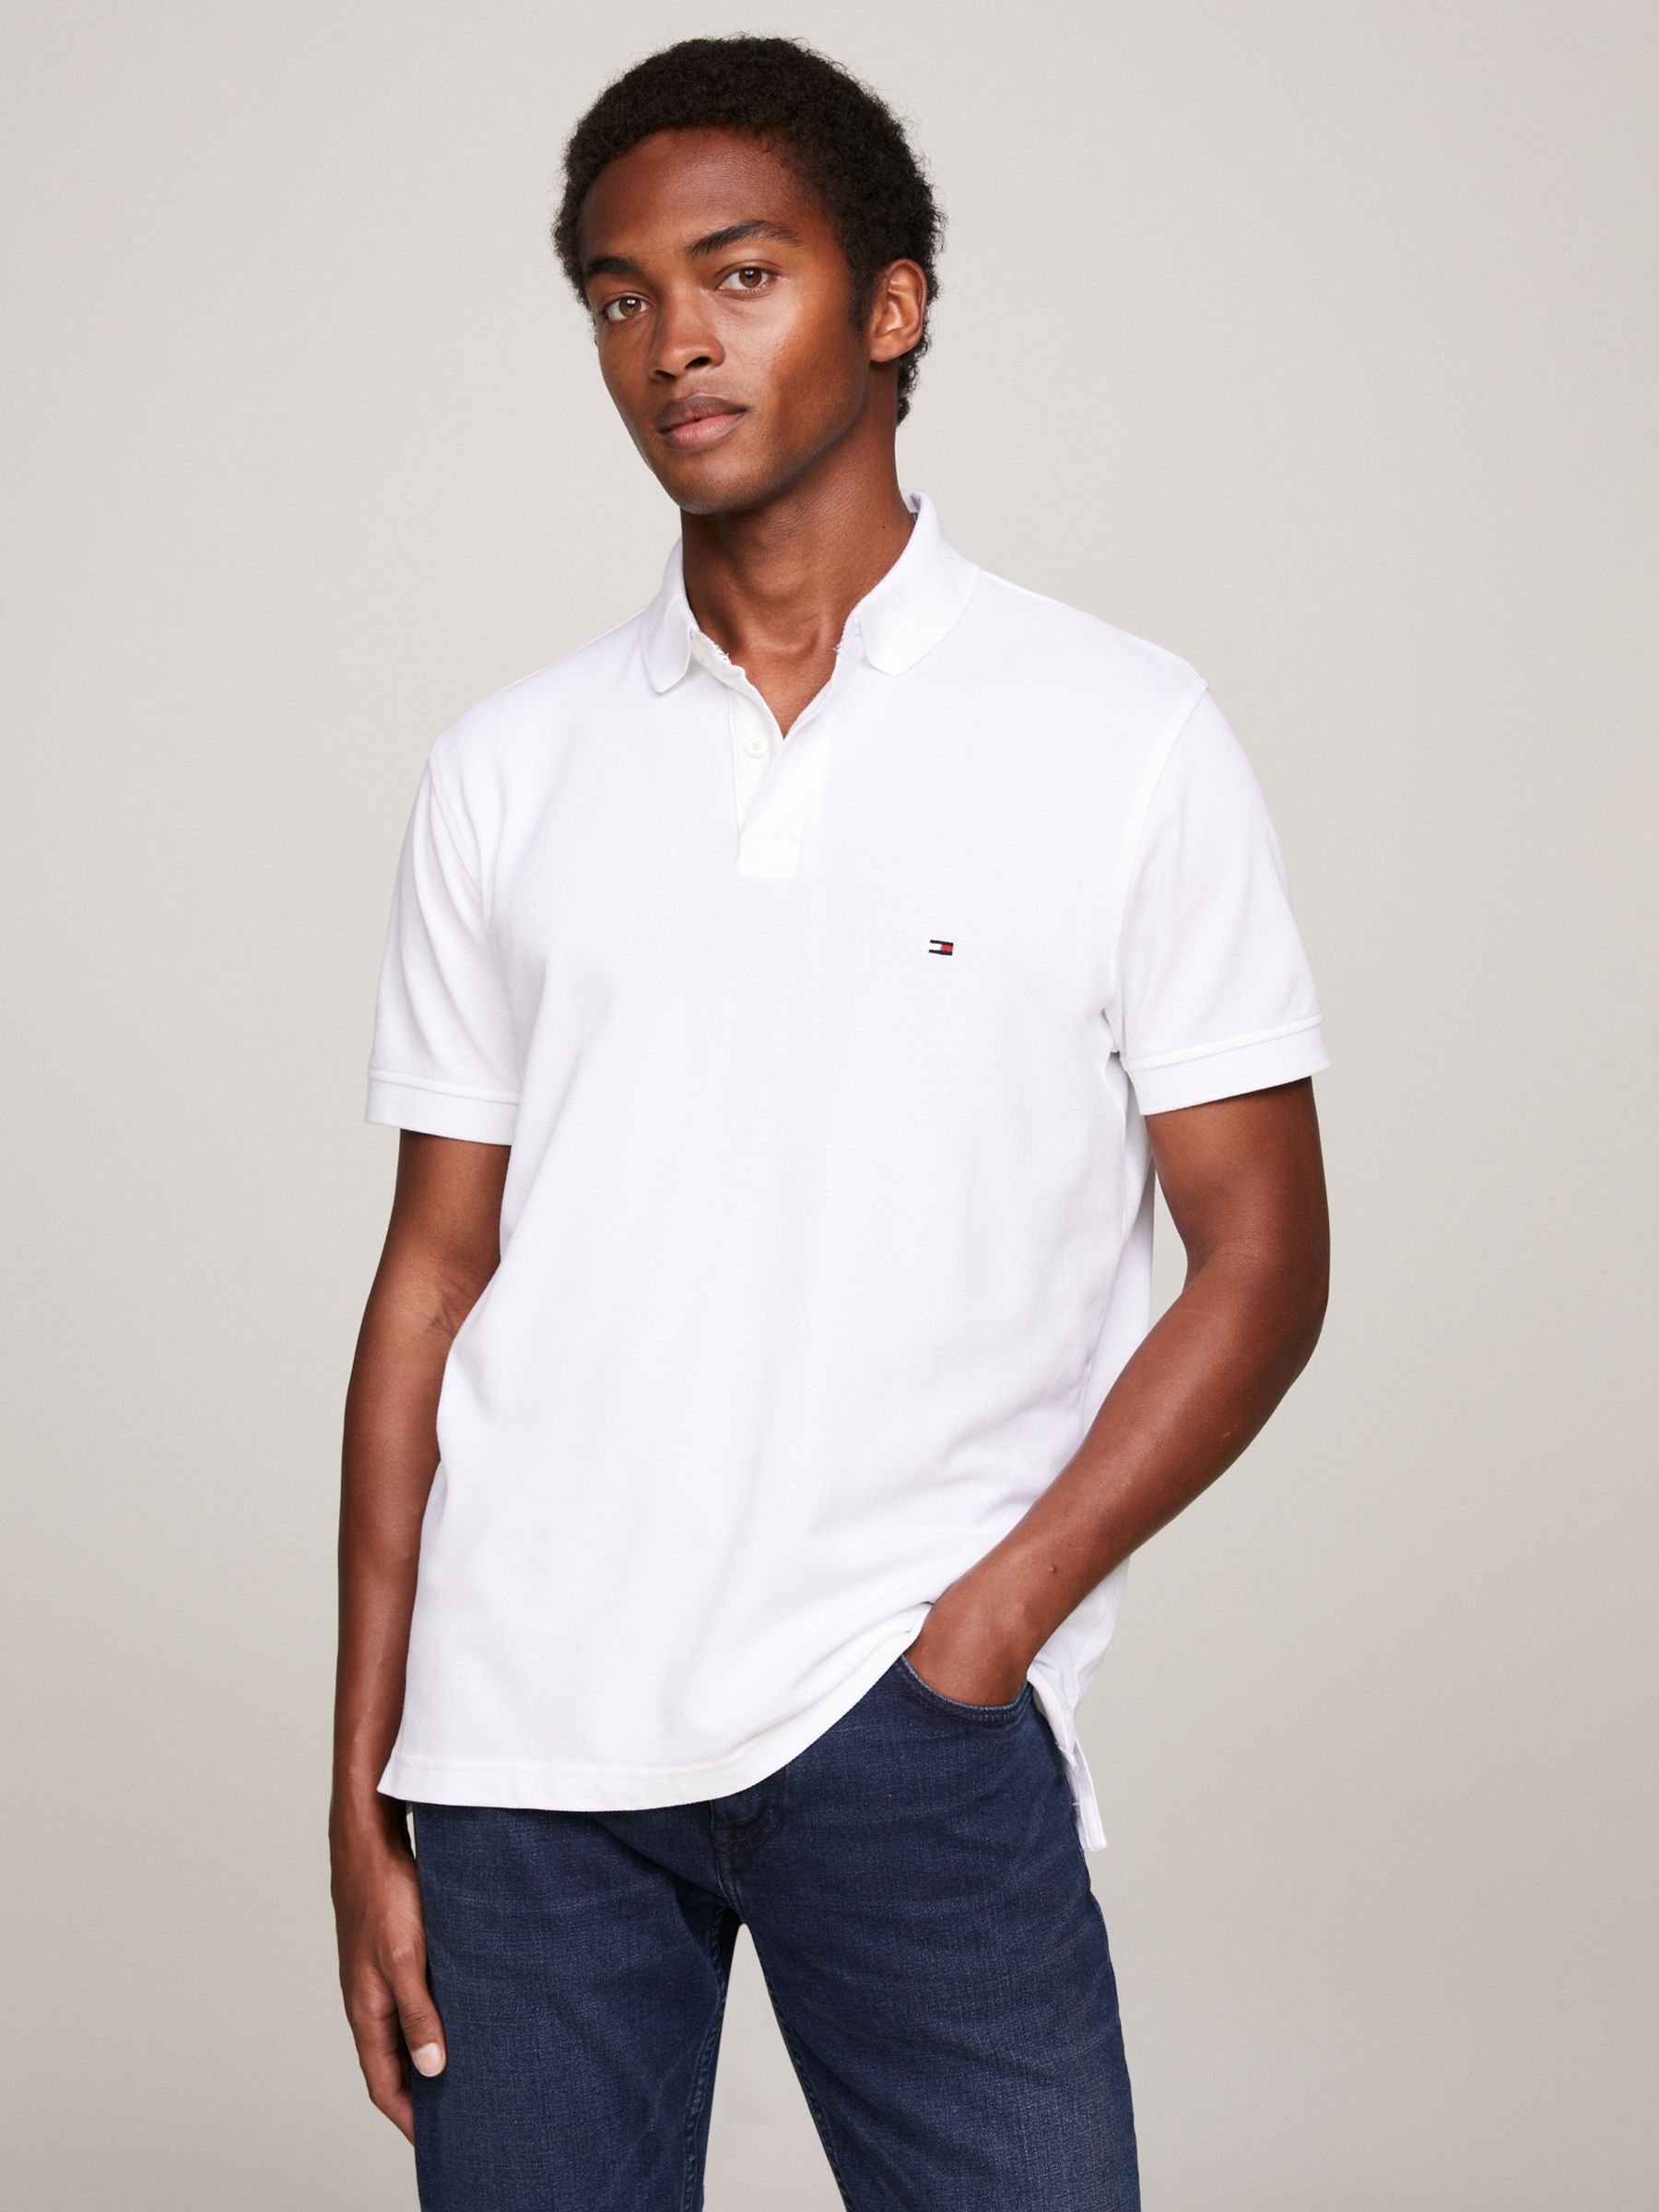 Tommy Hilfiger 1985 Regular Fit Polo Shirt, White at John Lewis & Partners